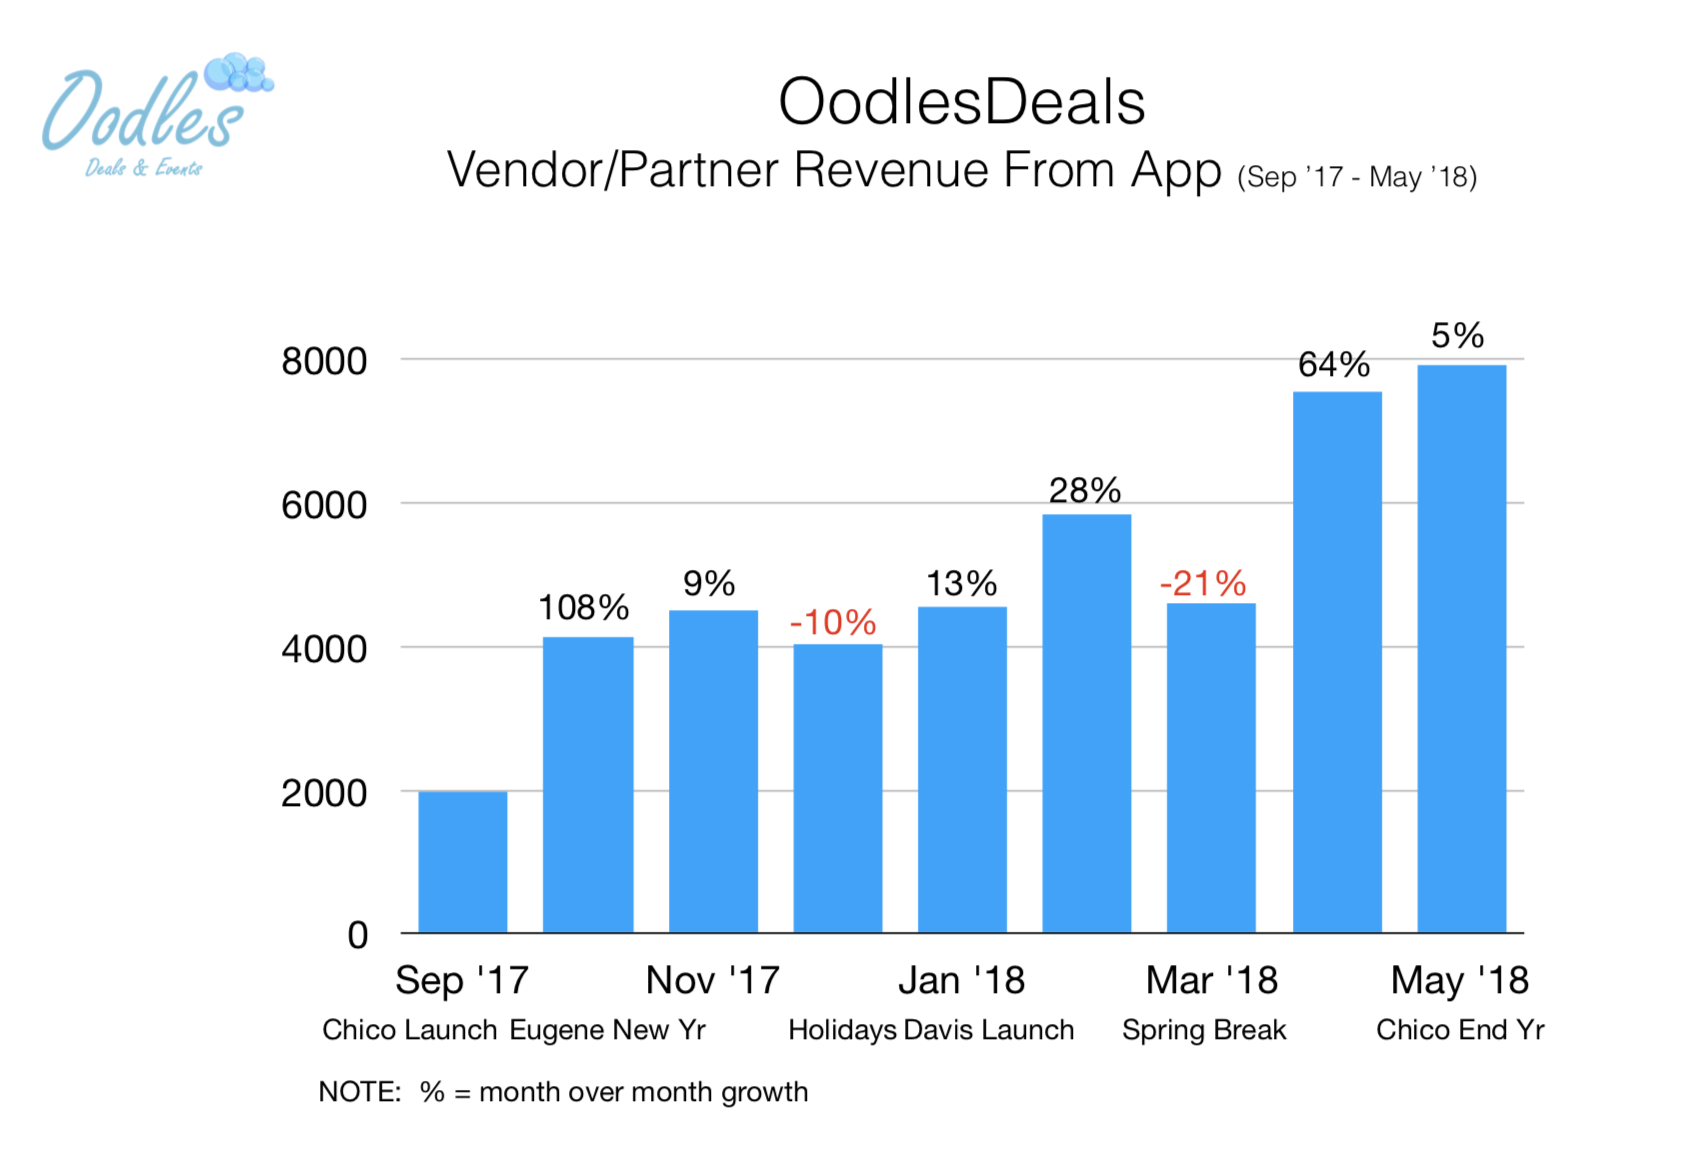 Oodles_Yr 2017 - 18 Vendor Revenue Growth By Month_End May 2018.png